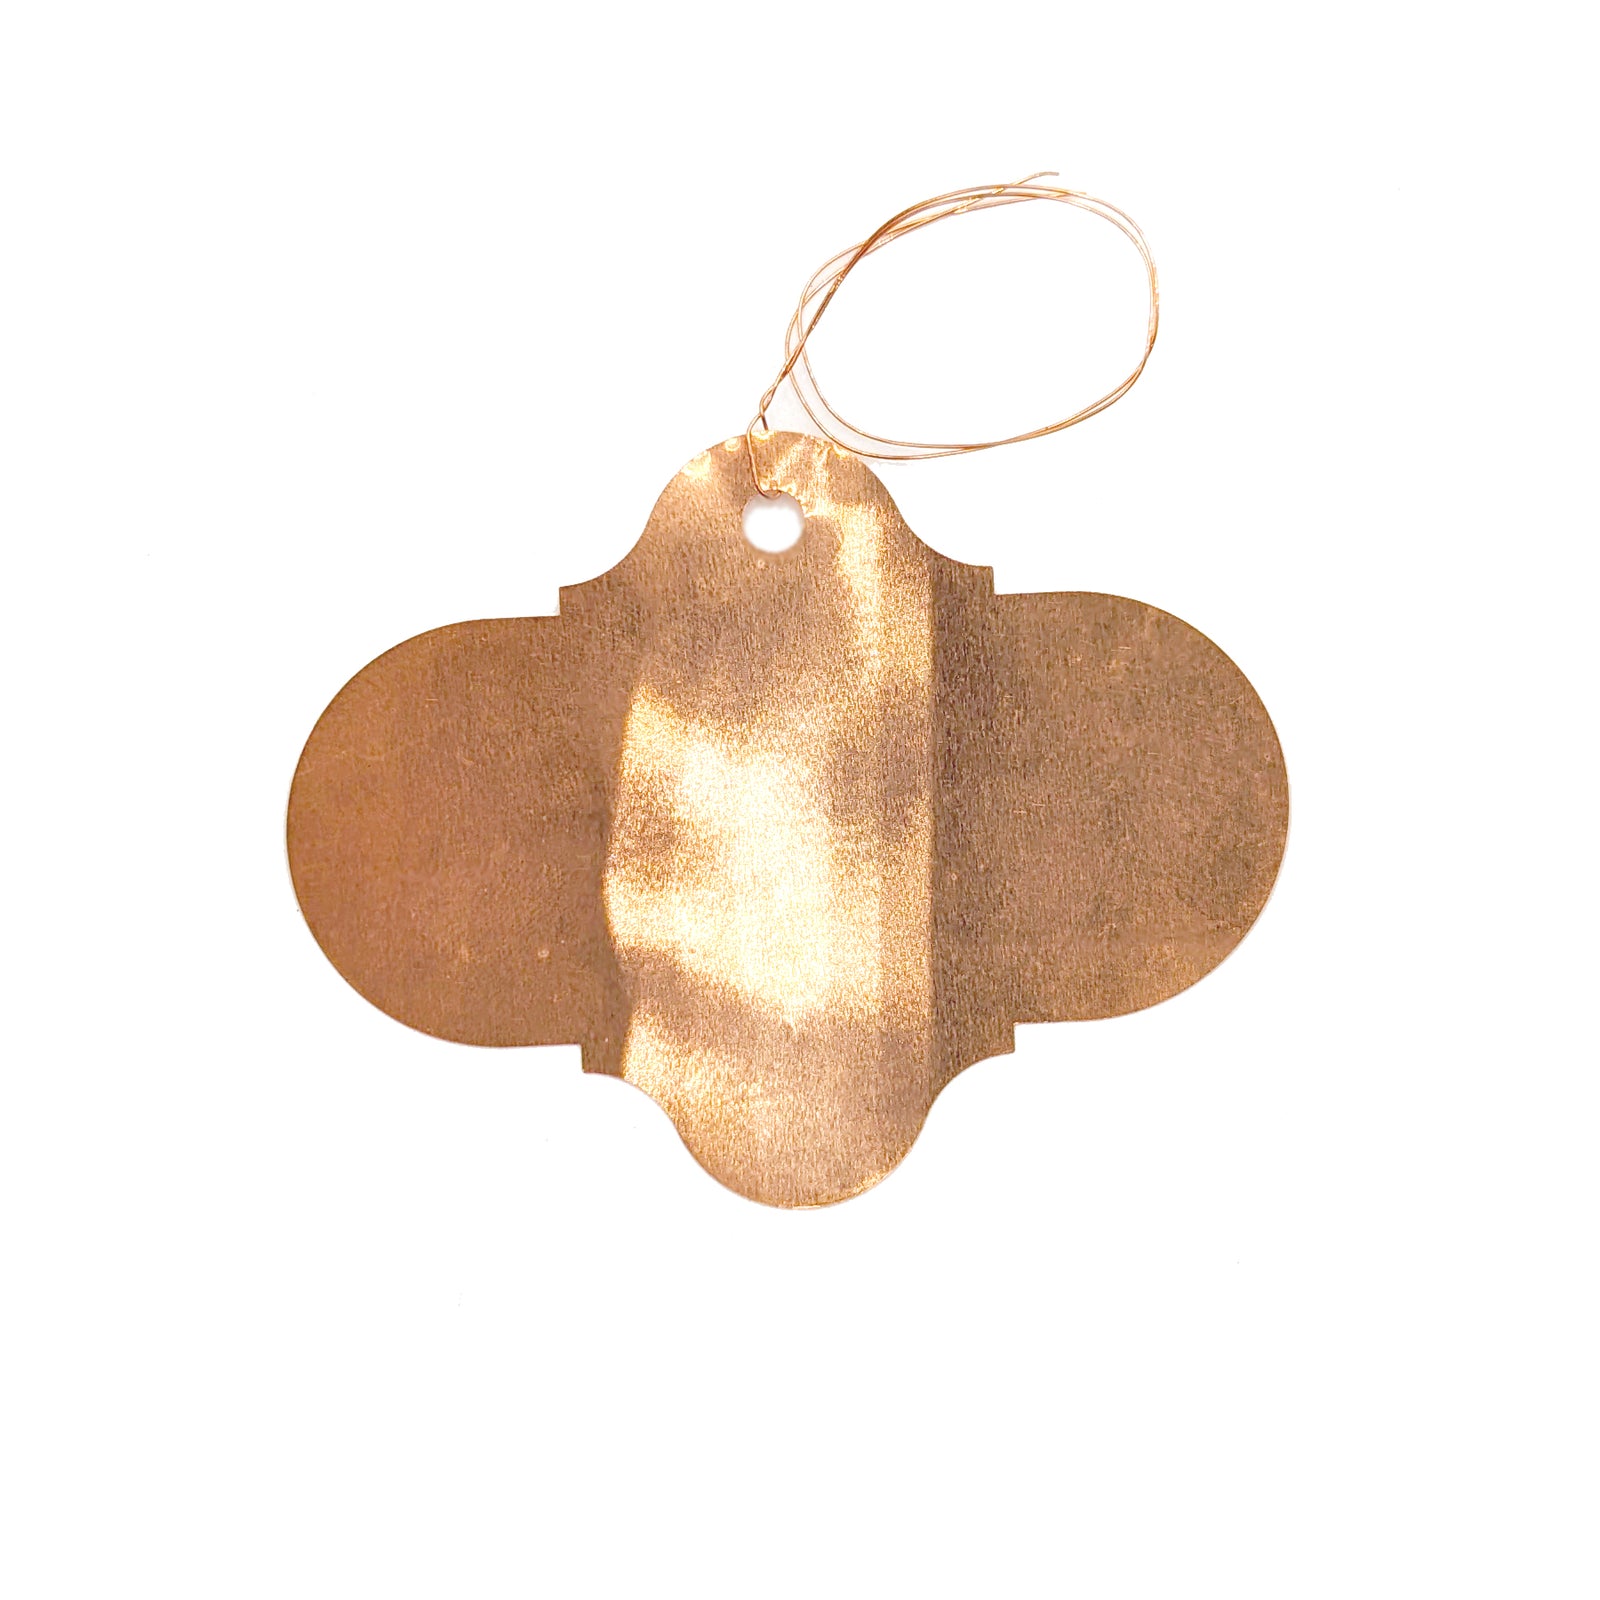 Wren Copper Plated Tags with Wire Ties (10)